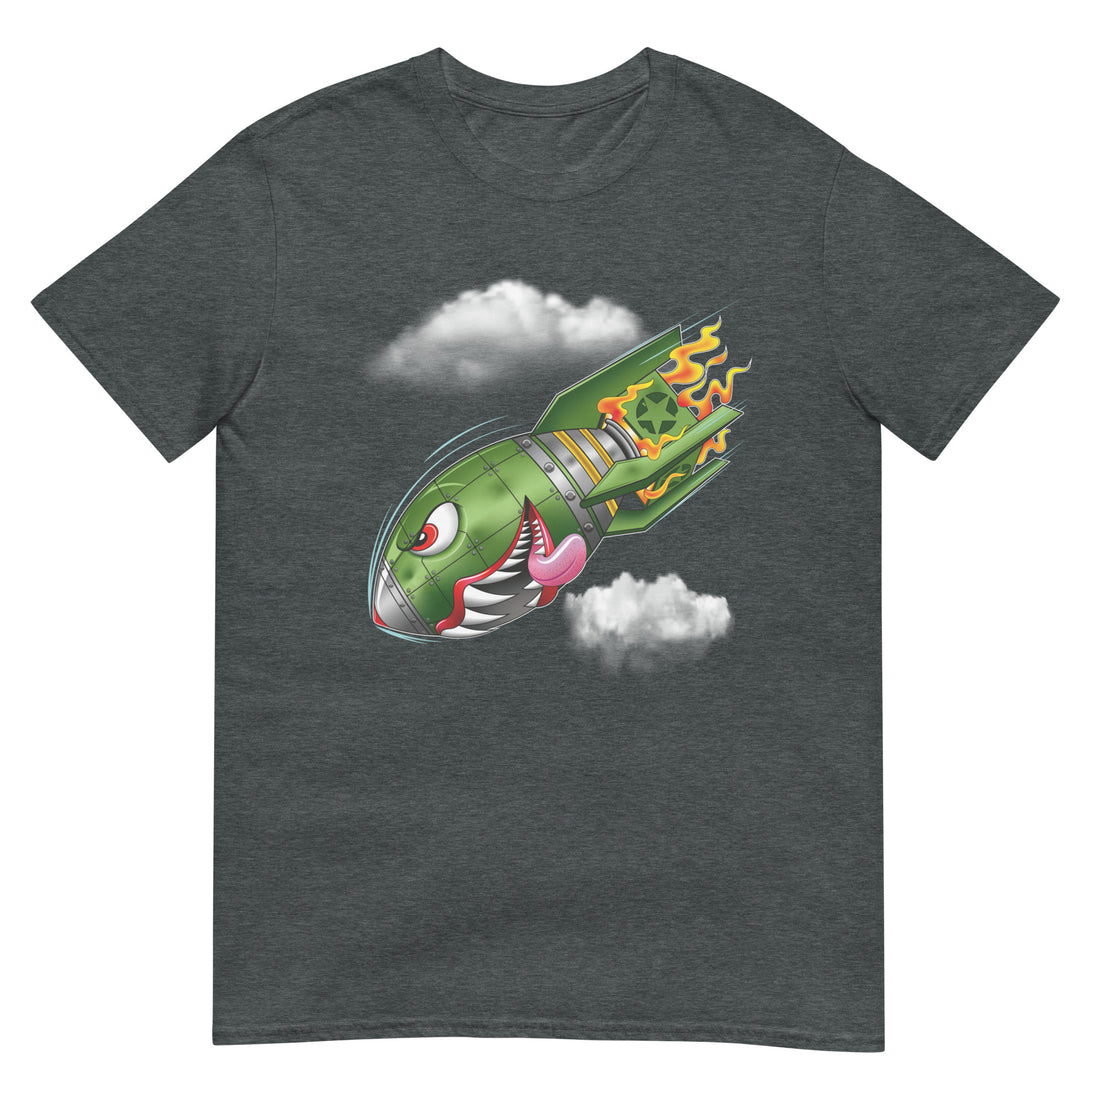 A dark grey t-shirt with a military green neo-traditional bomb tattoo design. The bomb is falling with a look of determination in its eyes, an evil toothy grin, and its tongue hanging out of its mouth. Flames are coming from the back of the bomb, and some clouds are in the background.